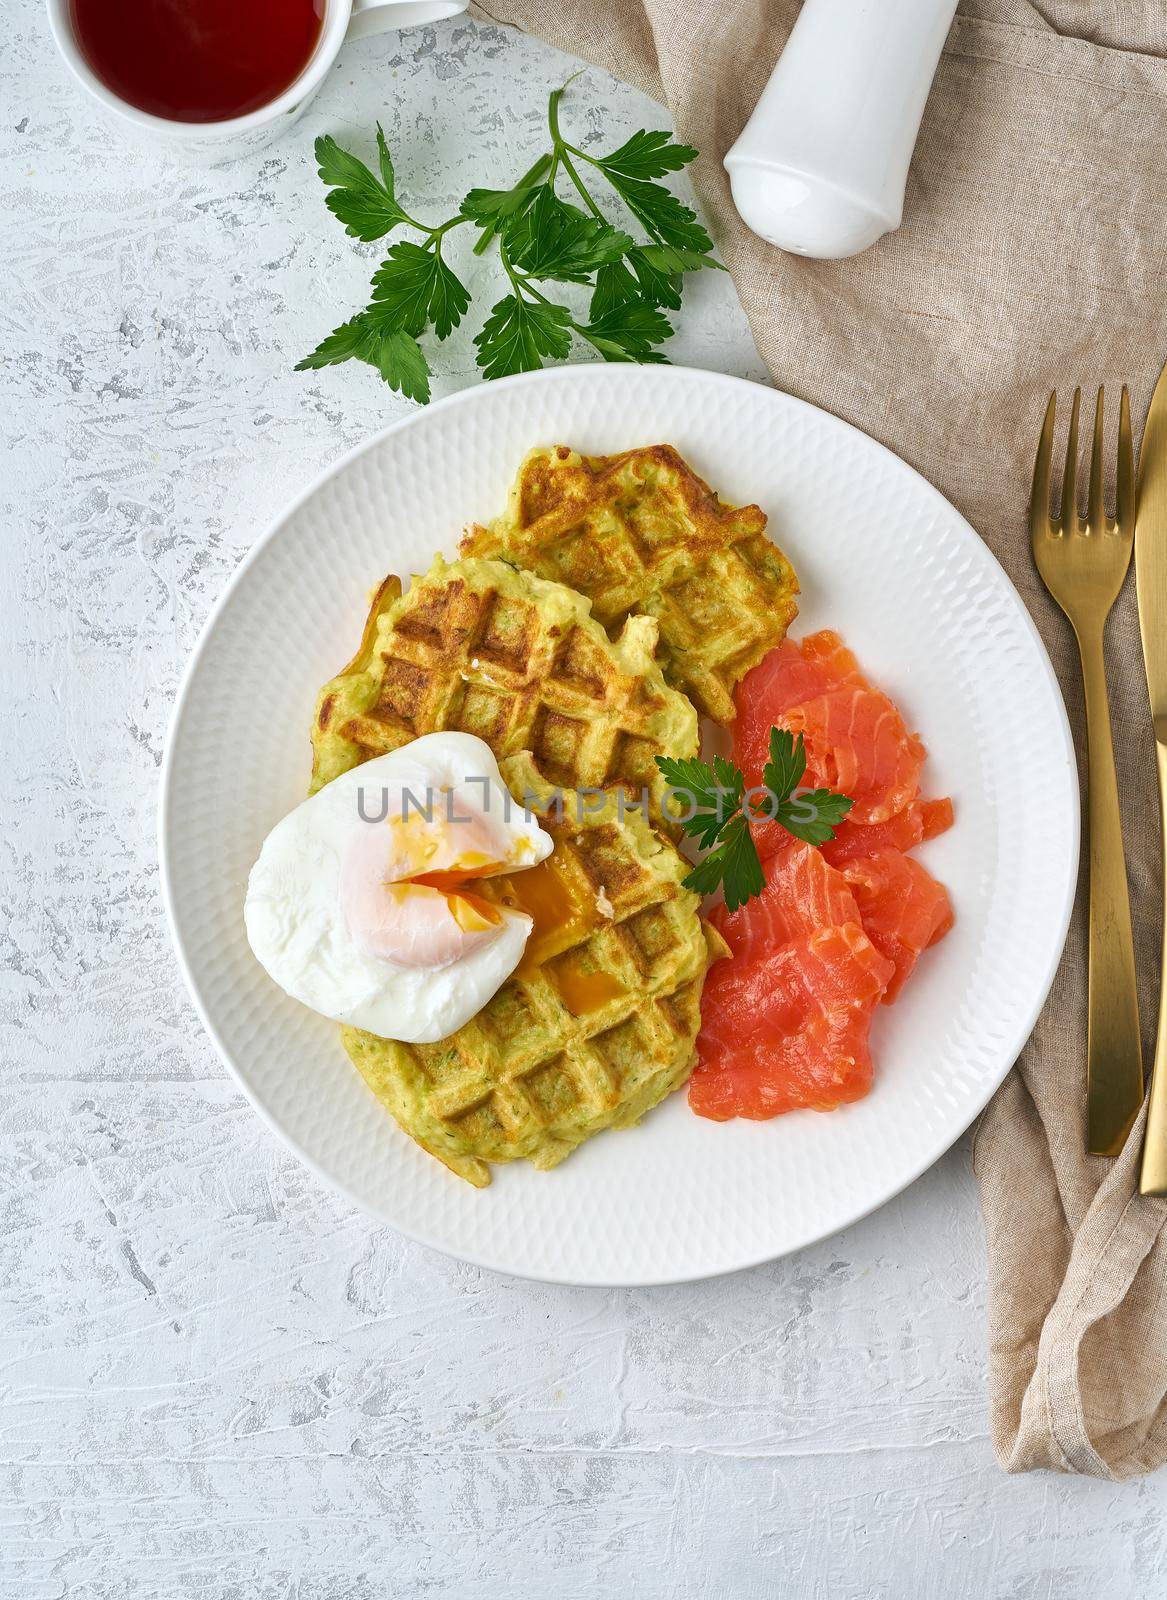 Zucchini waffles with salmon and benedict egg, fodmap diet top view by NataBene